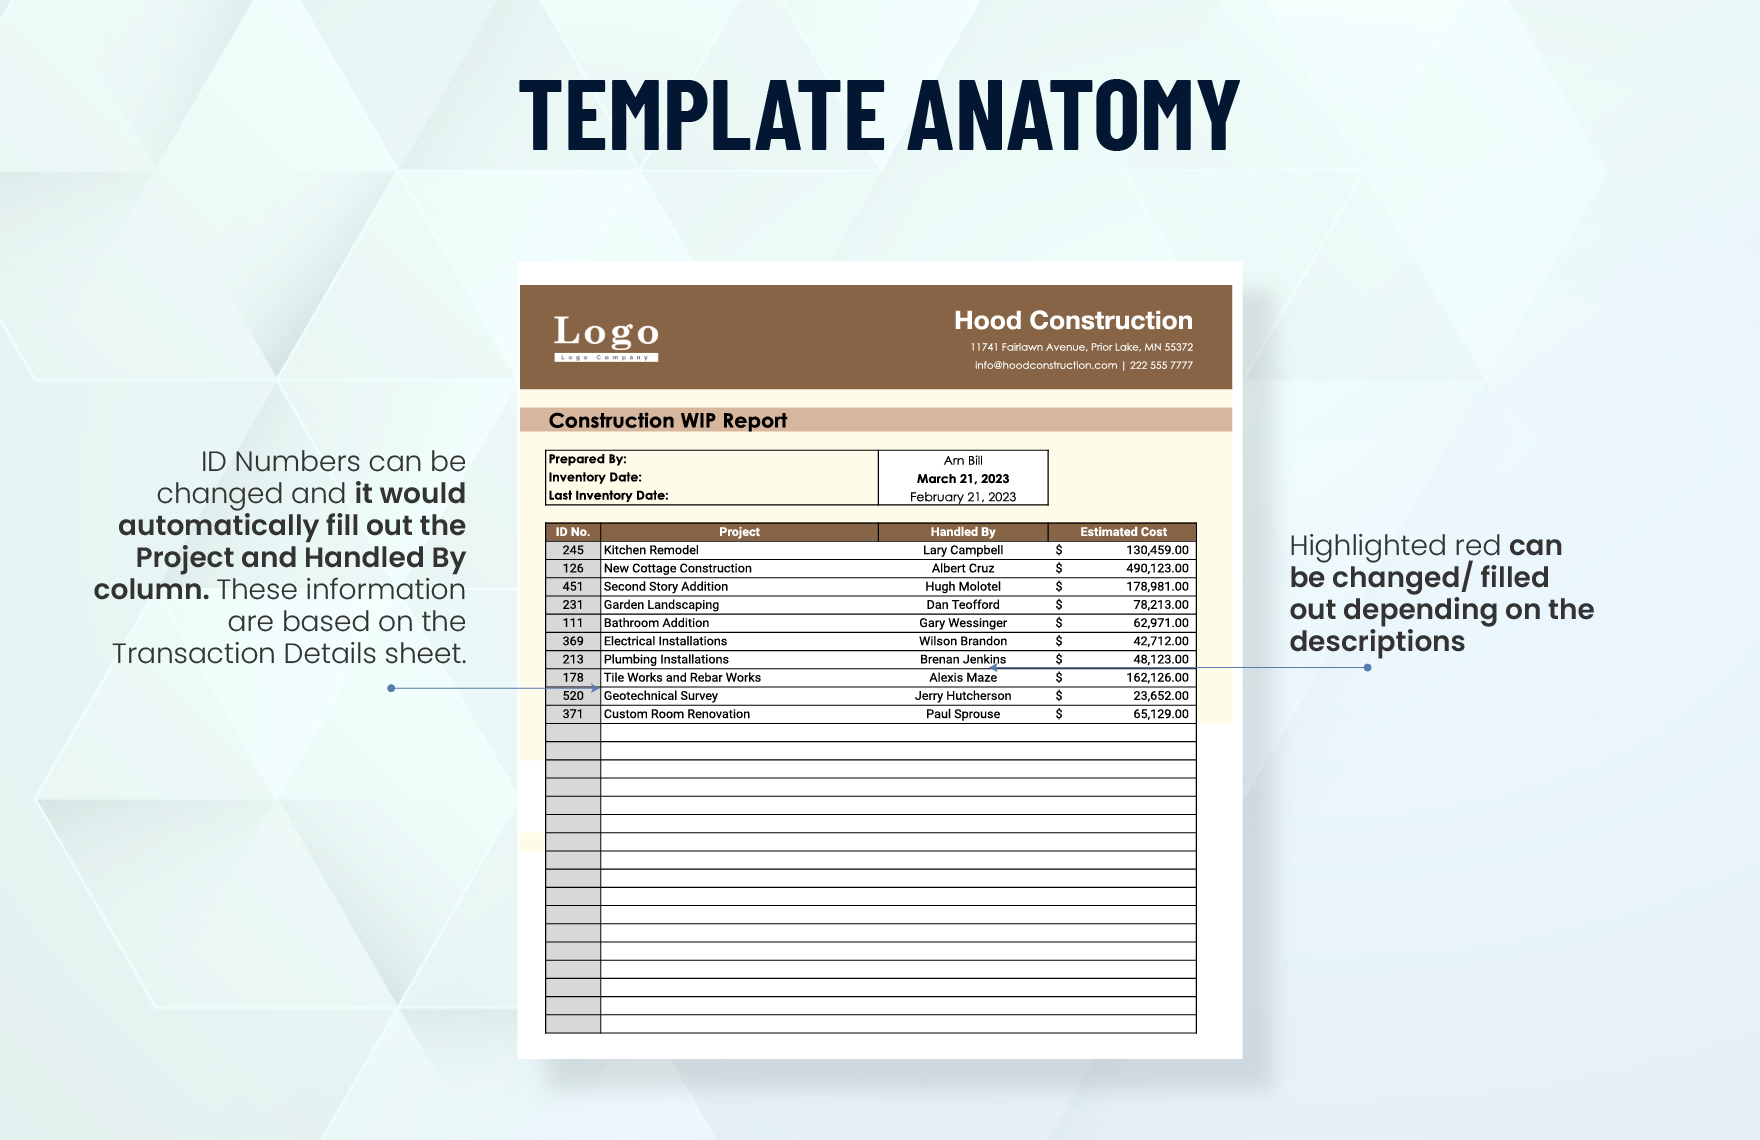 Construction WIP Report Template